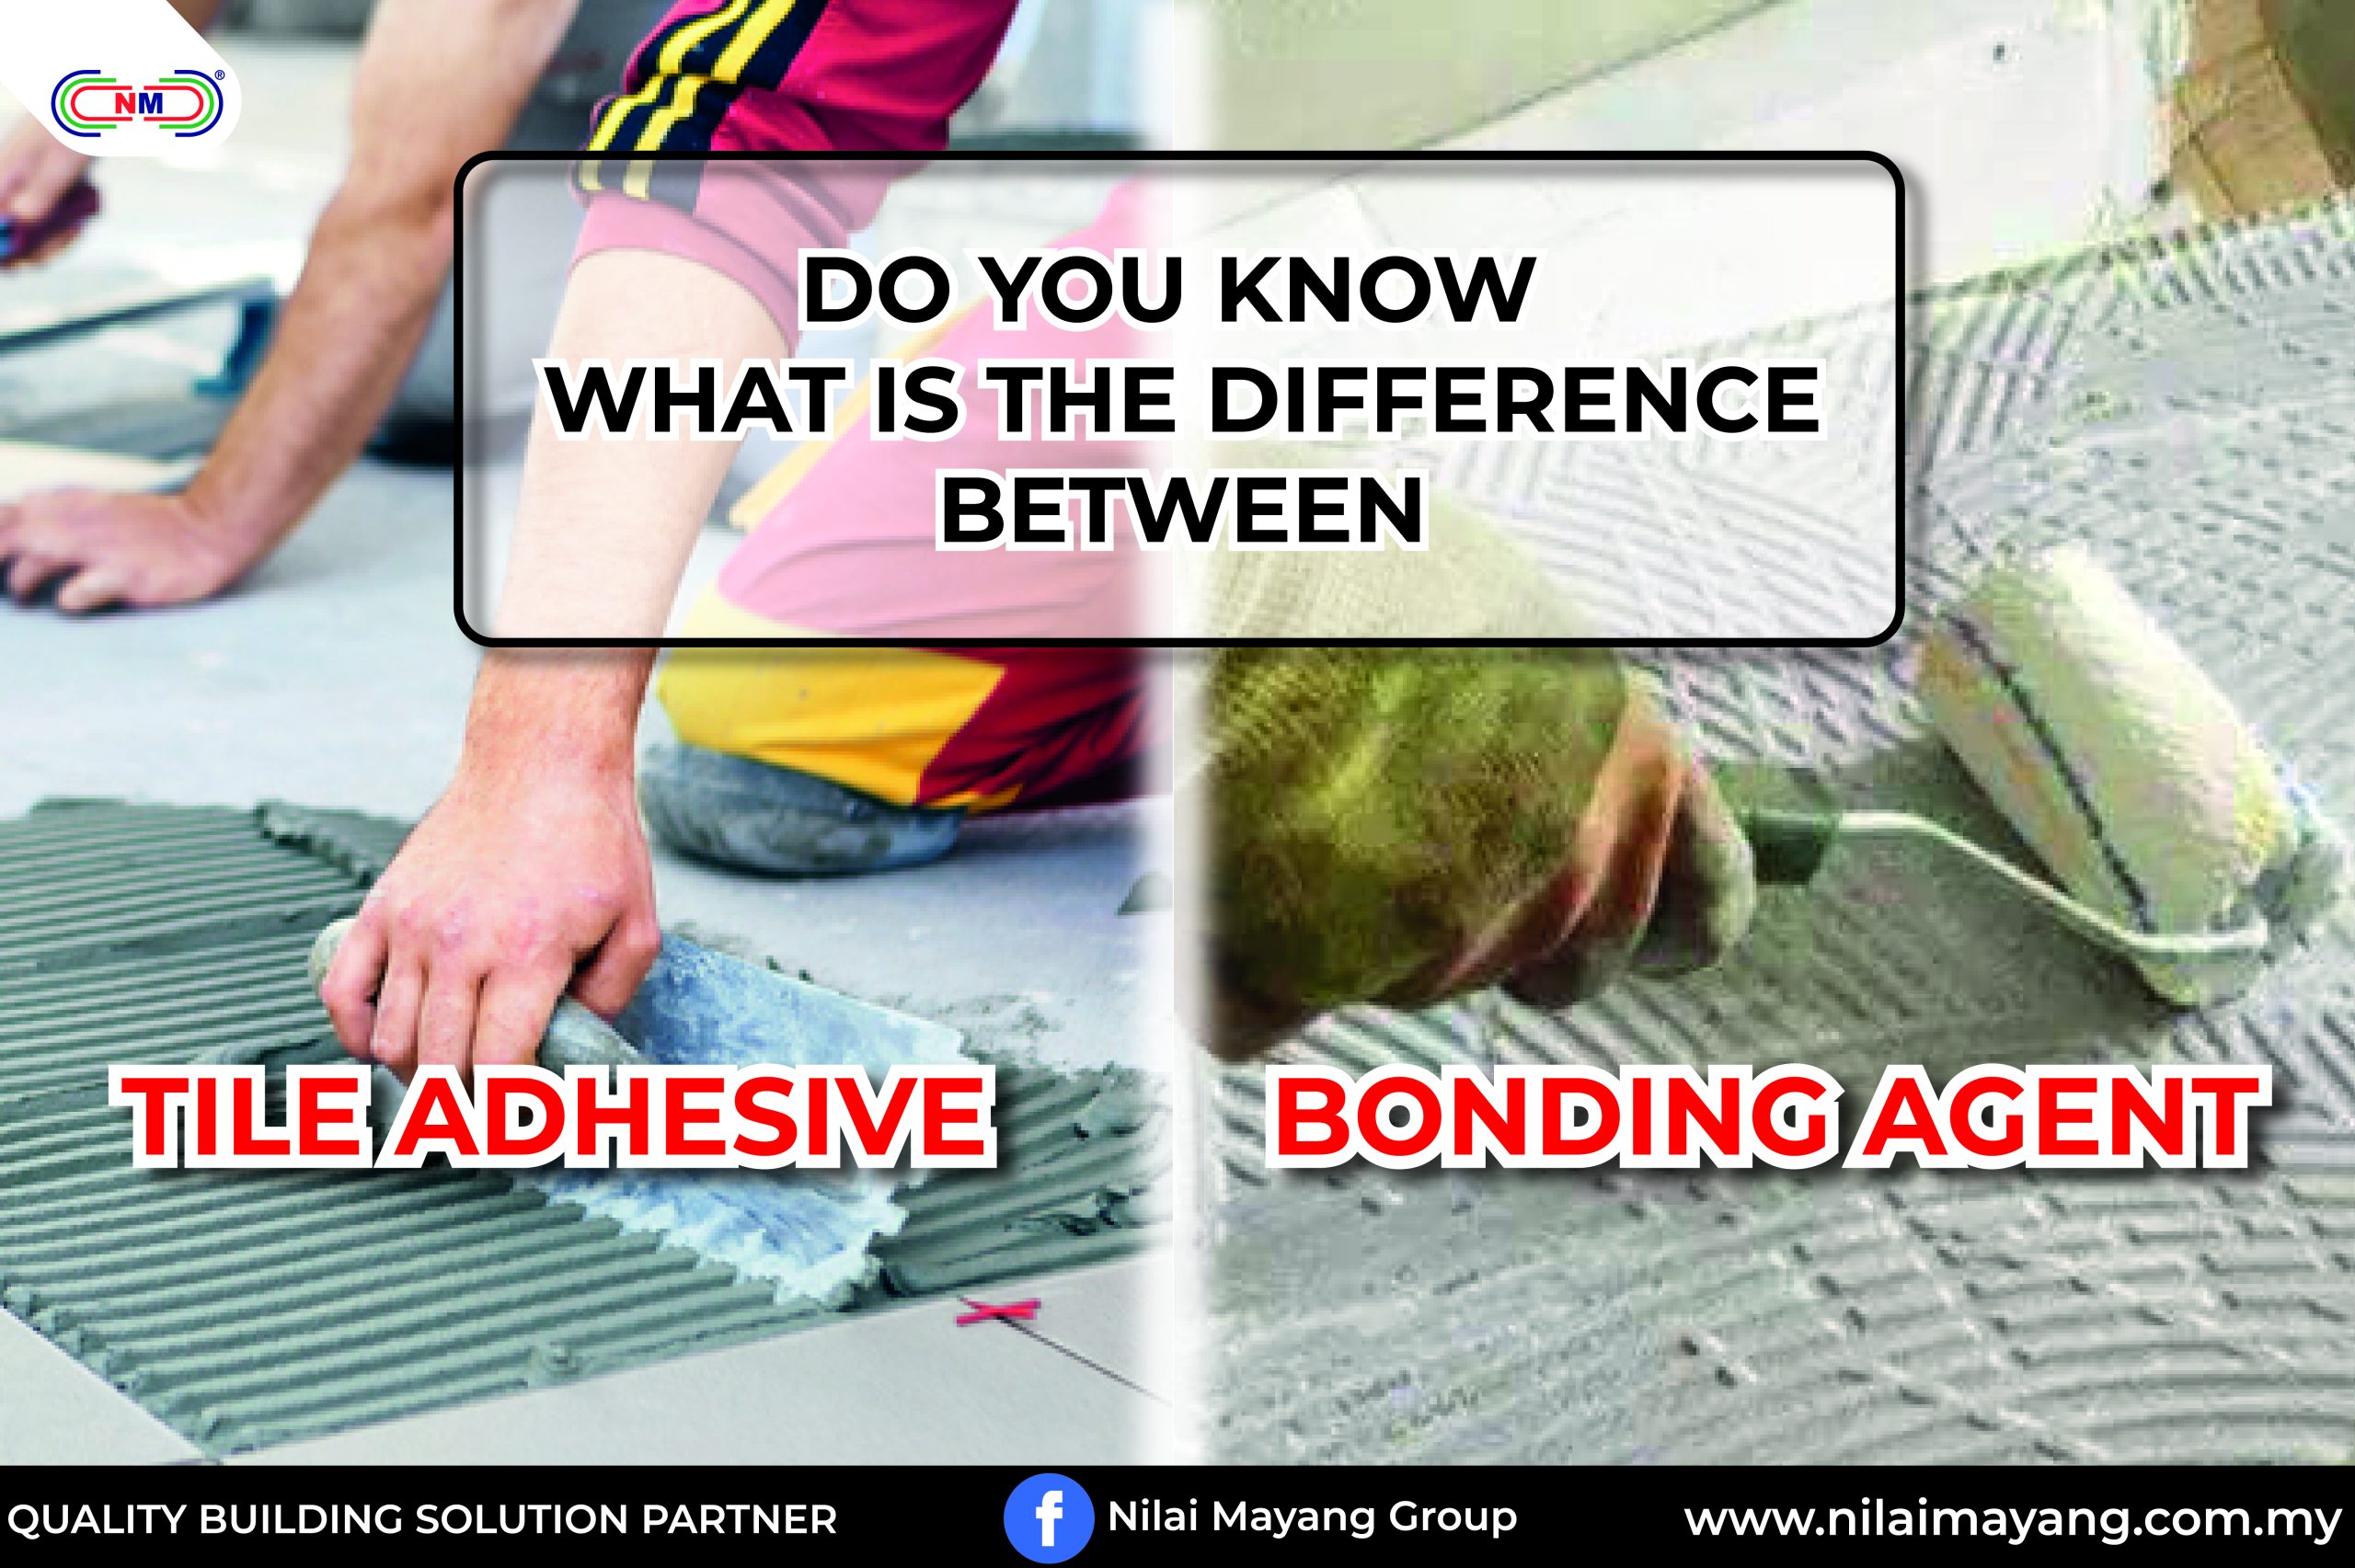 Comparison of different adhesives for bonding composites.